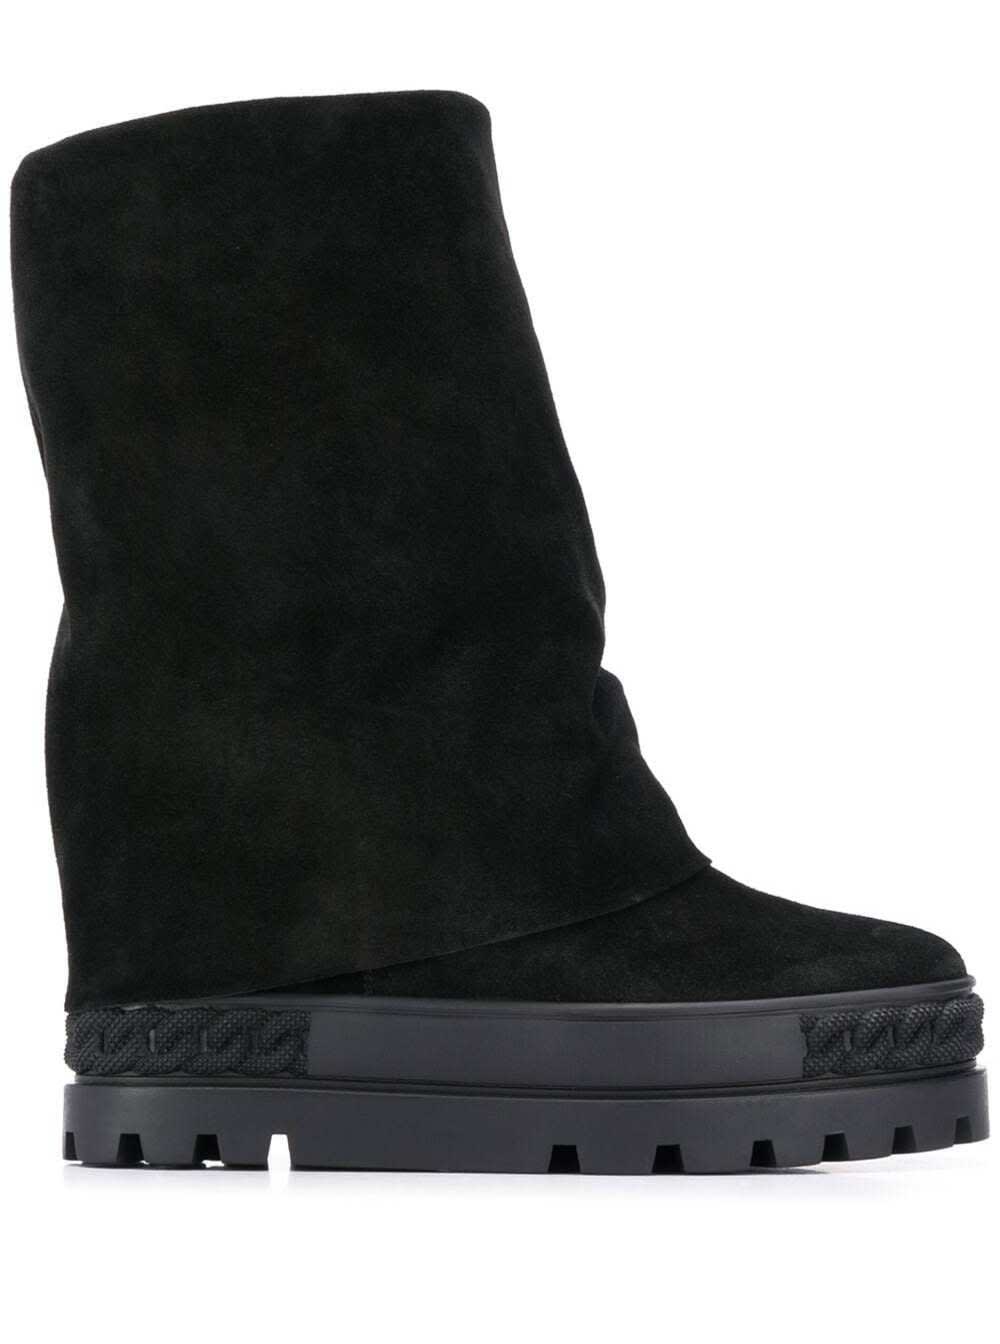 Casadei Black Suede Leather Boots